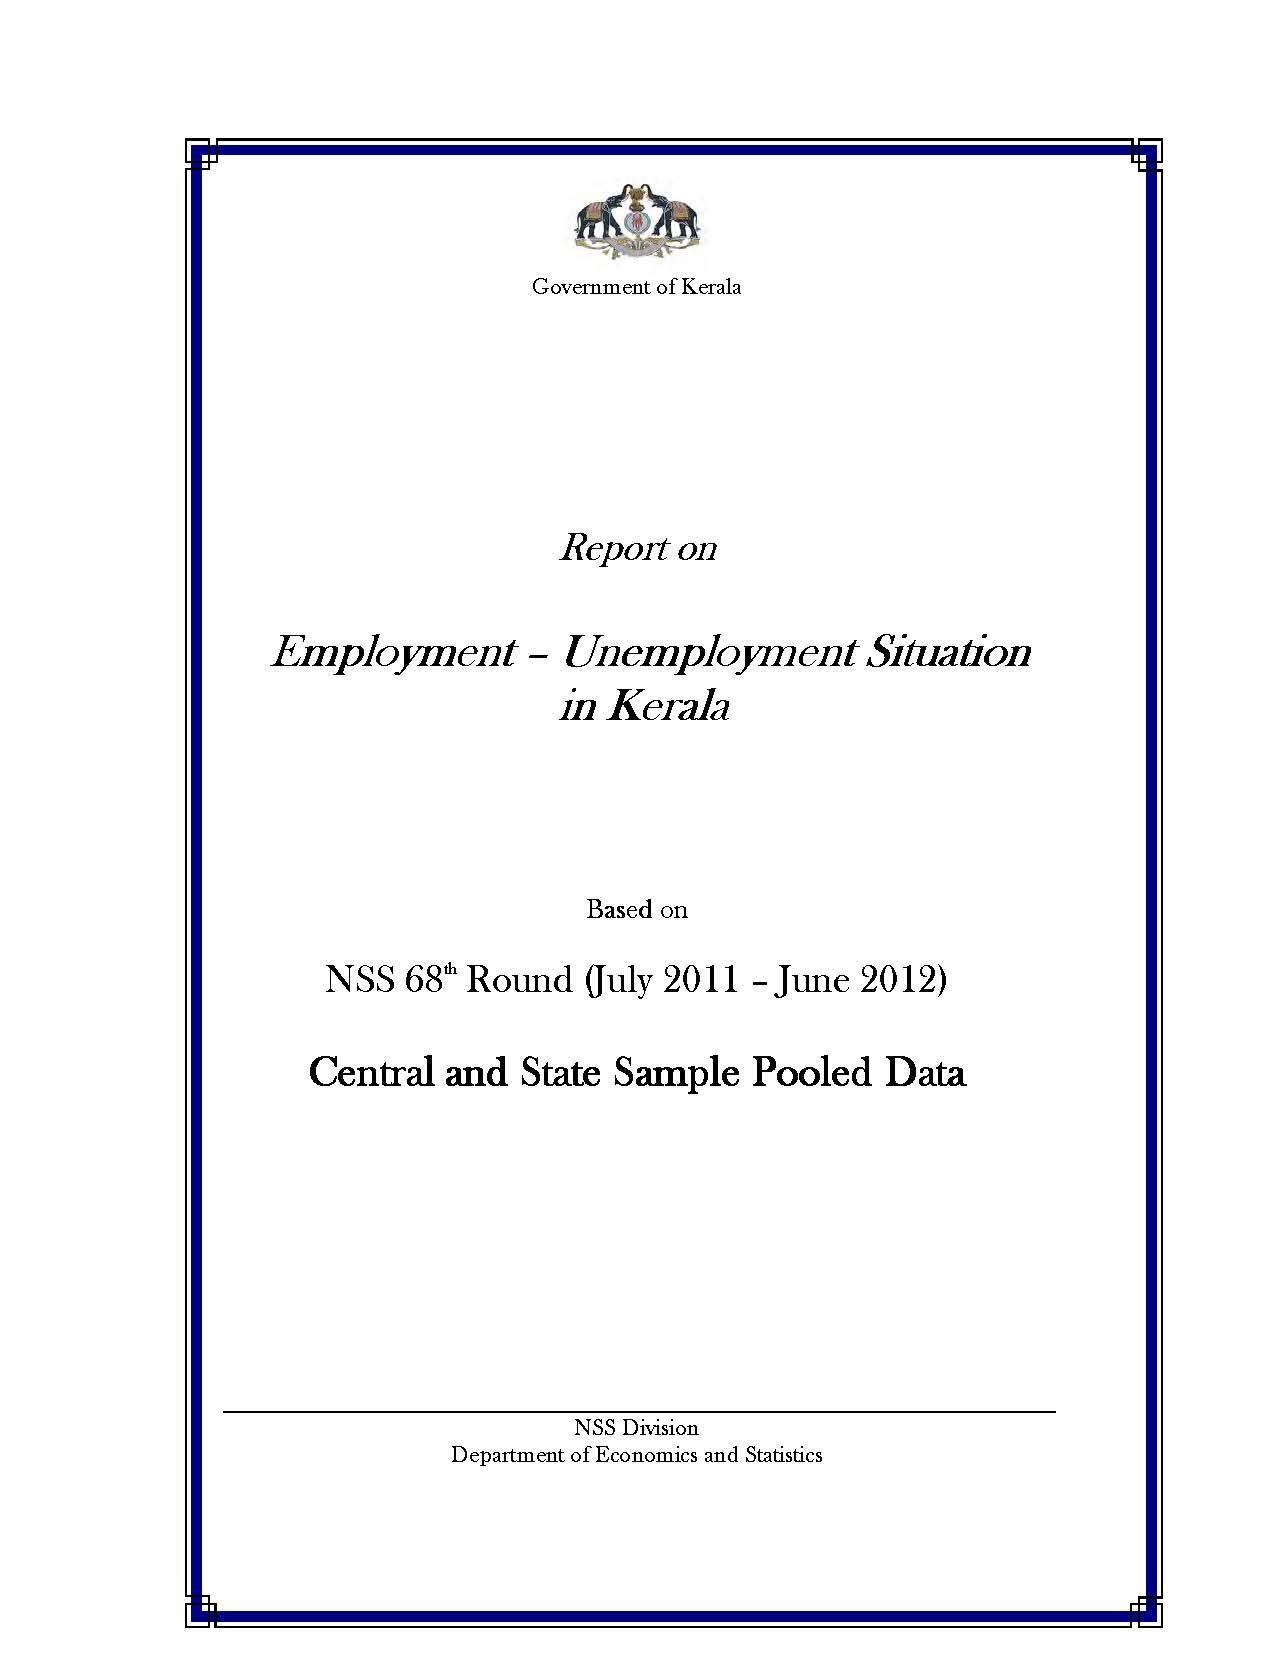 NSS 68th round - Employment - Unemployment Situation in Kerala